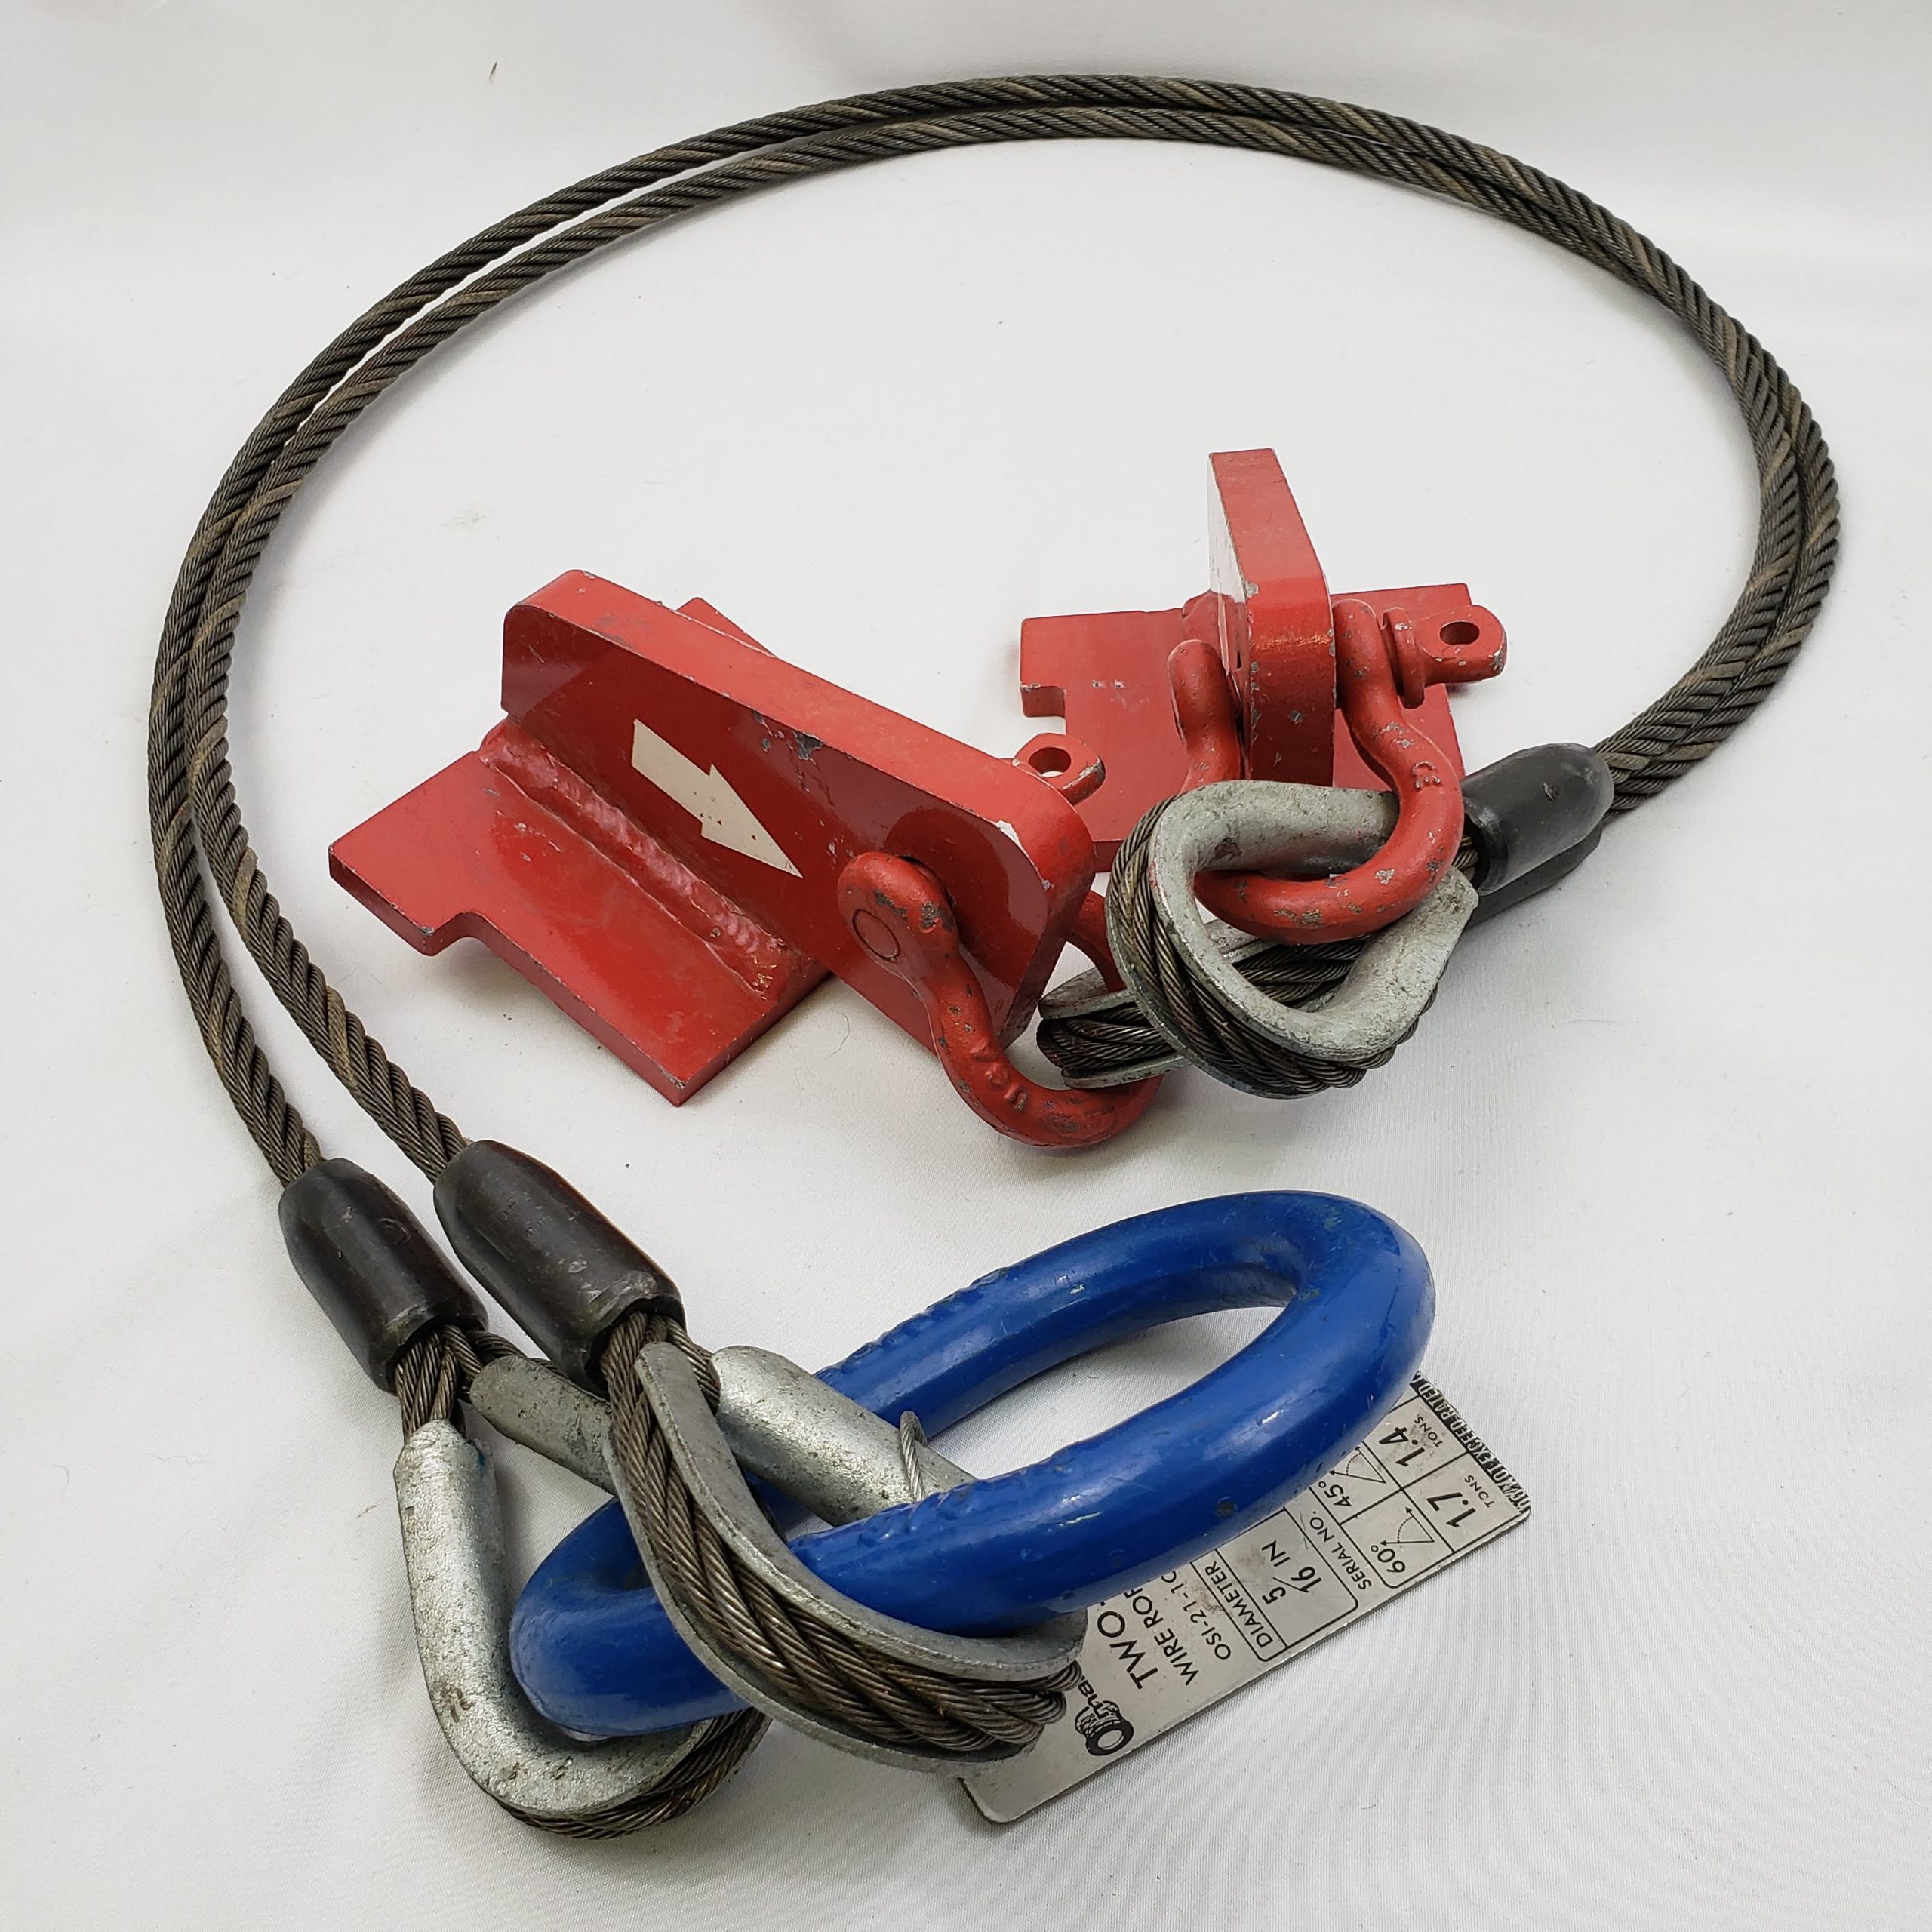 Railroad Tools and Solutions, Inc.  CONCRETE TIE LIFTING SLINGS - Railroad  Tools and Solutions, Inc.